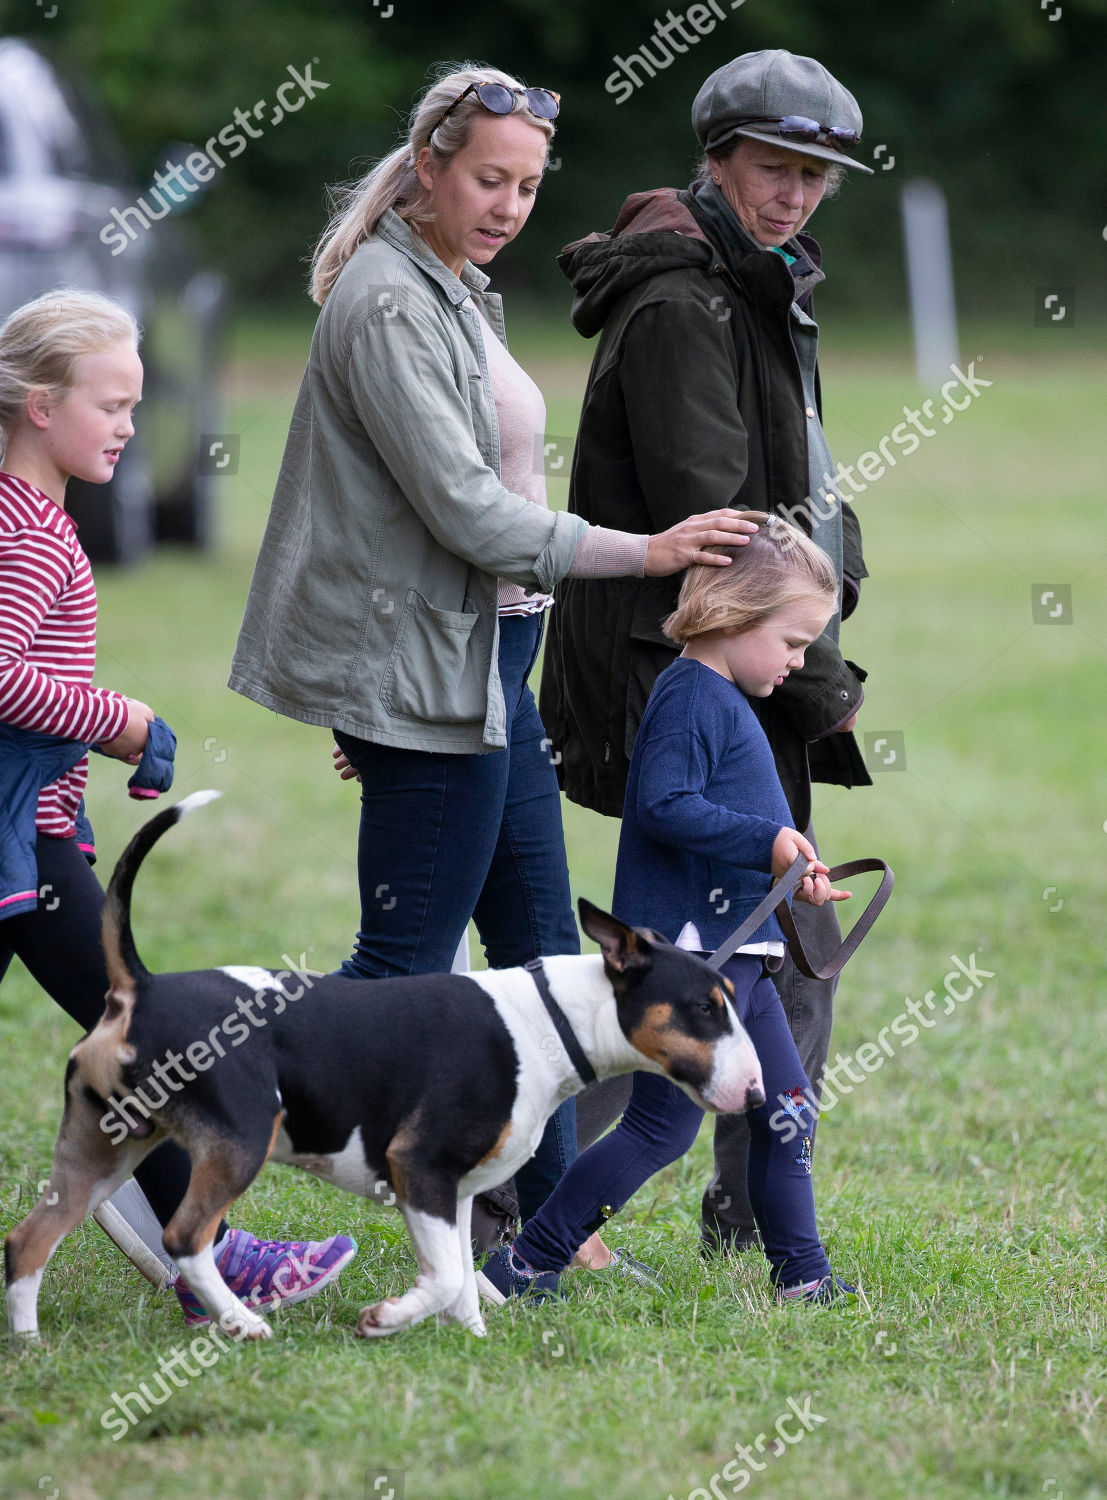 whately-manor-international-horse-trials-at-gatcombe-park-gloucestershire-uk-shutterstock-editorial-9877099x.jpg